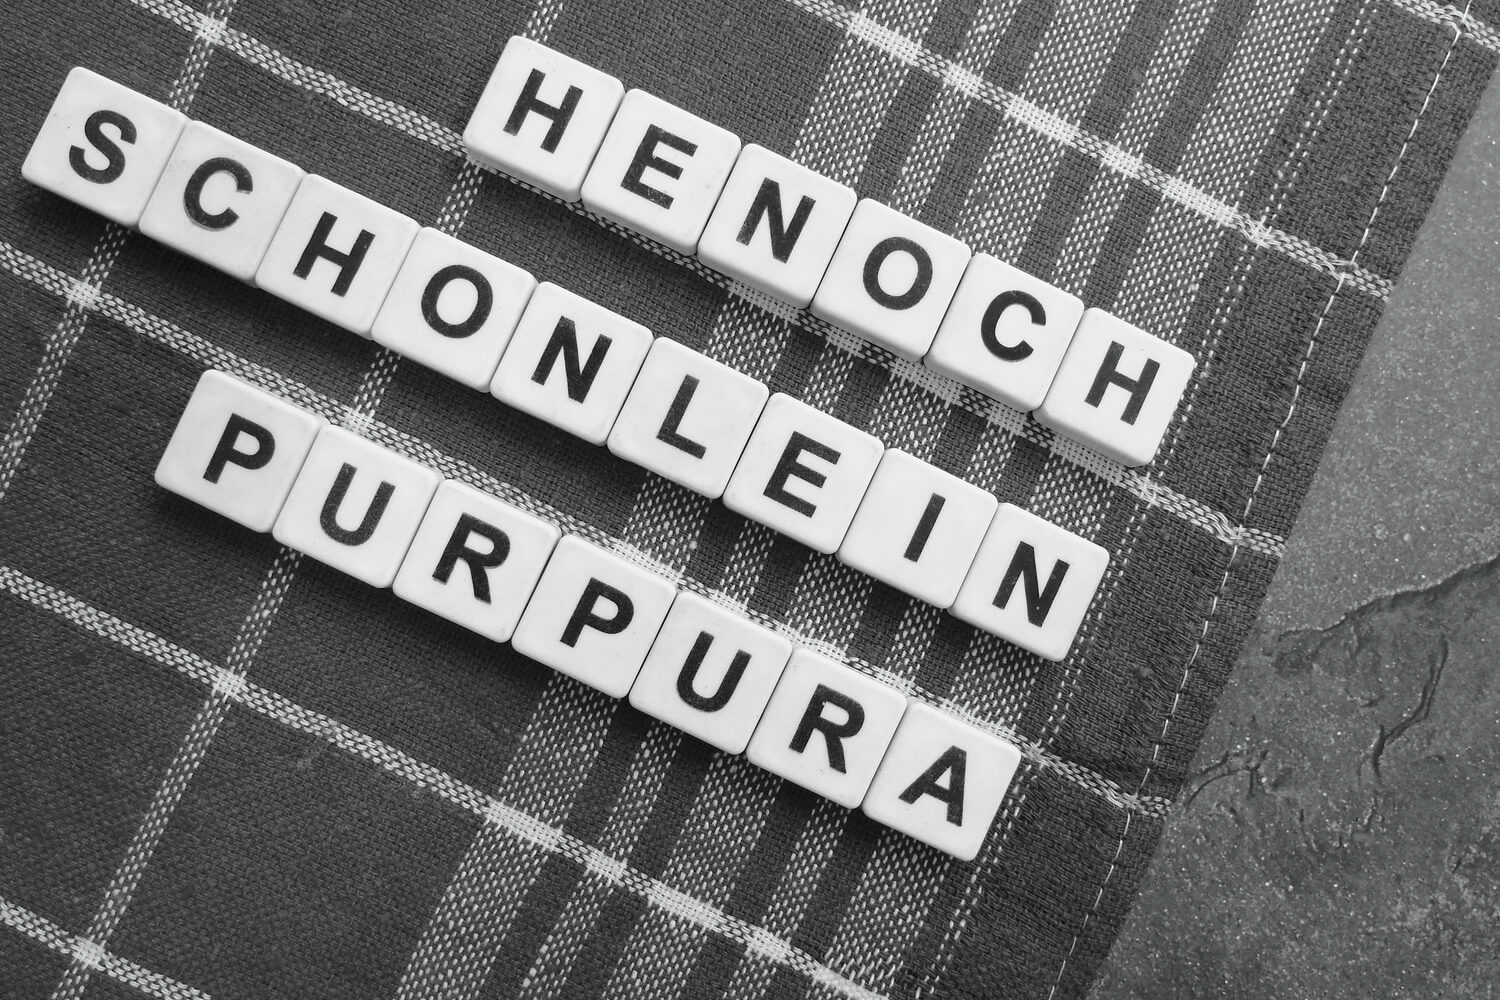 My Child is Diagnosed With Henoch Schonlein Purpura(HSP) – What Should I Know by Dr. Sagar Bhattad